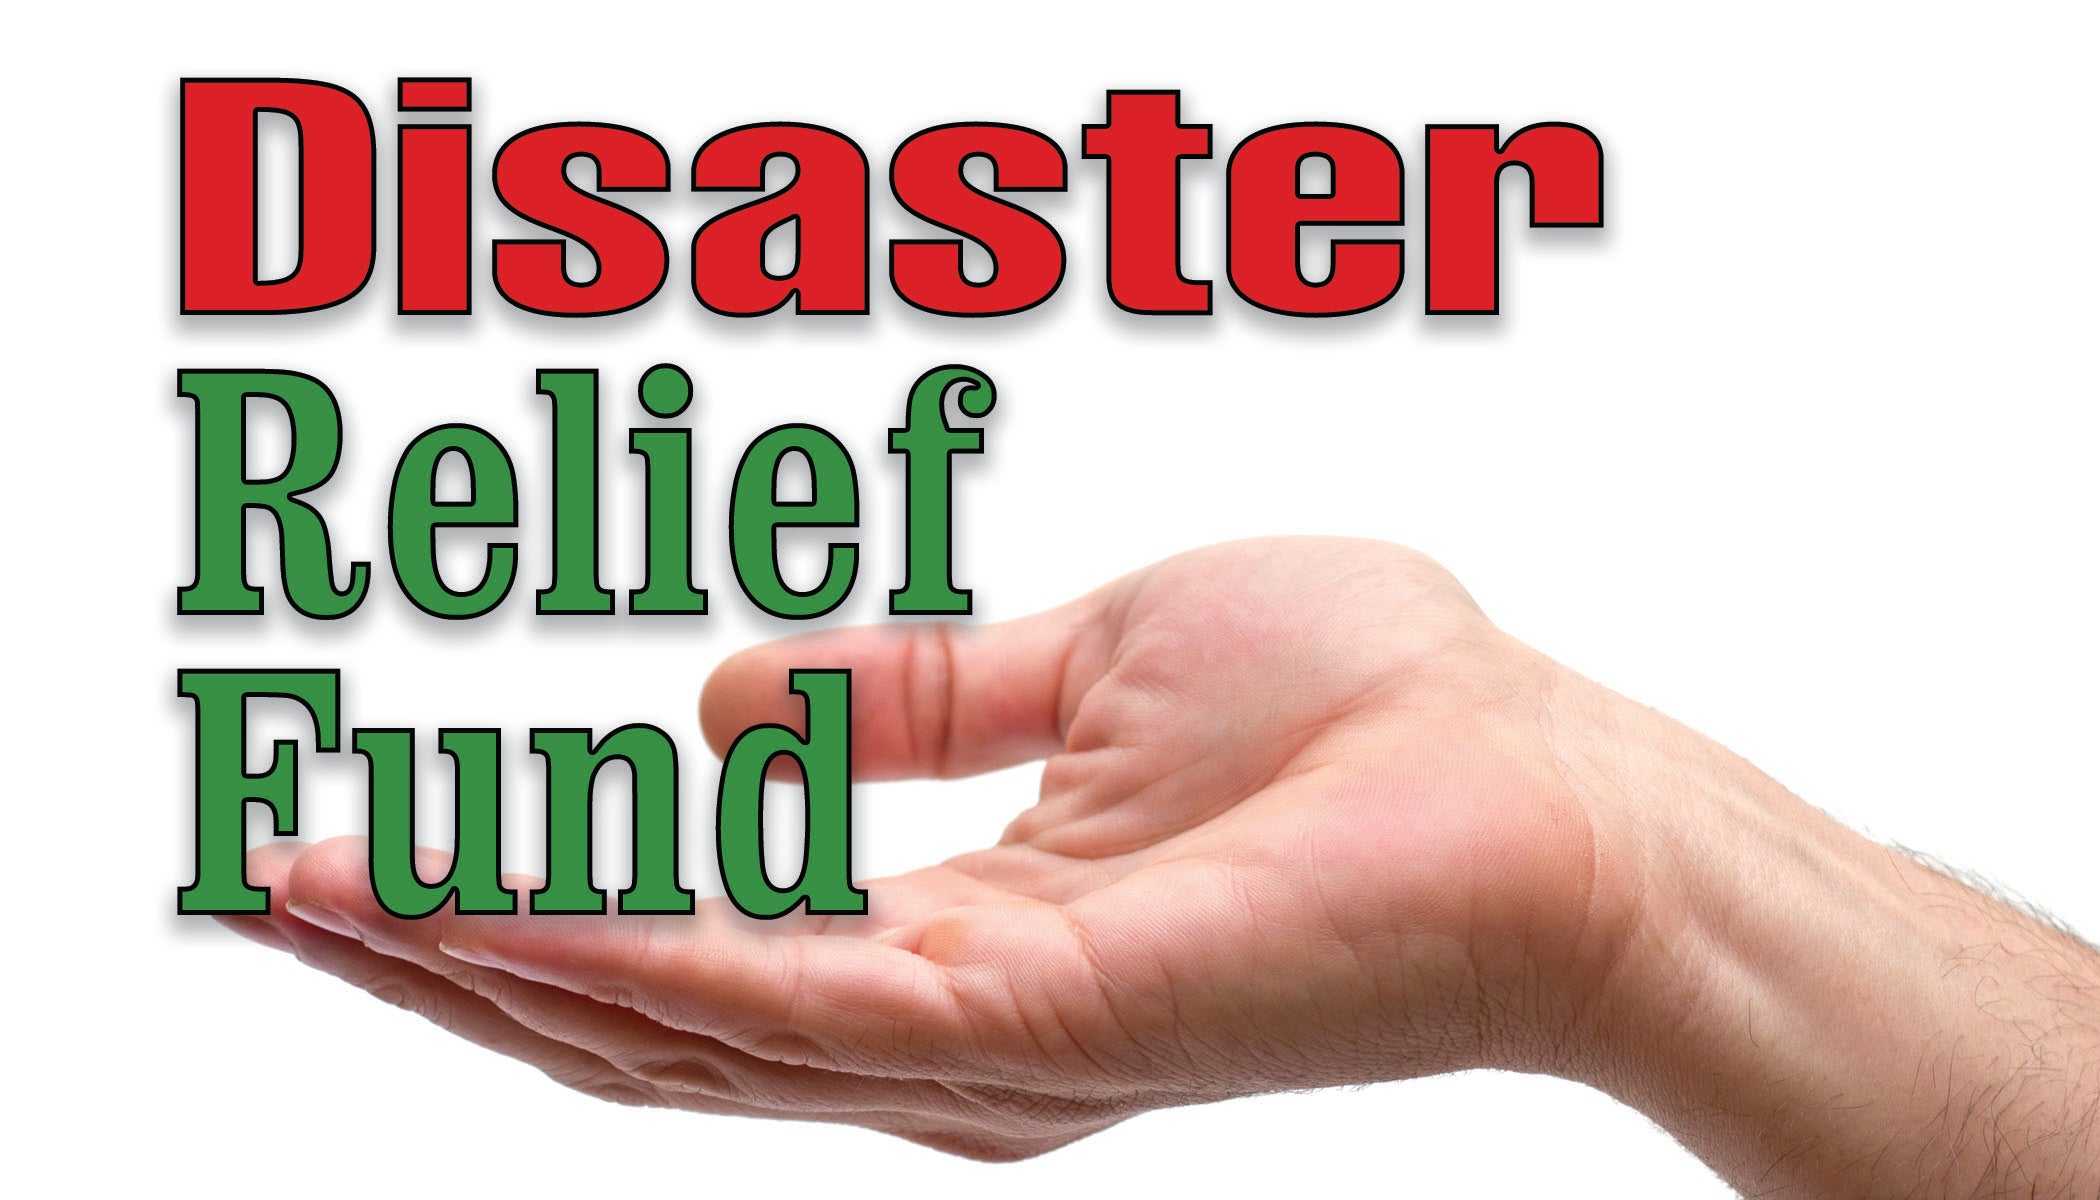 Disaster relief funding